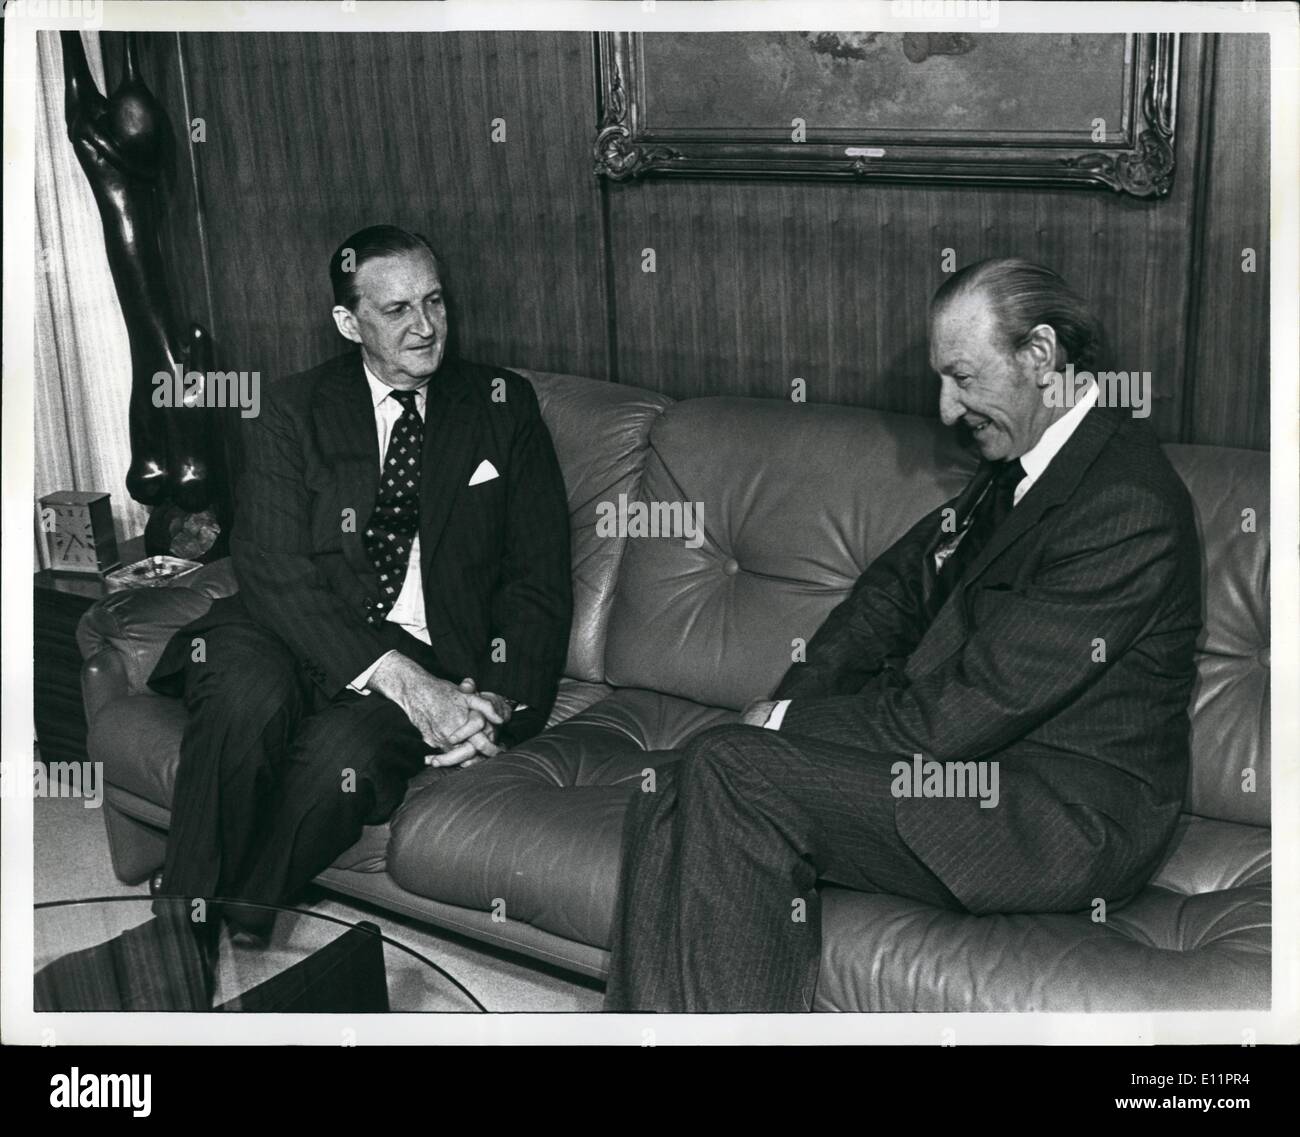 Jun. 06, 1979 - The United Nations, New York City: The governor of Hong Kong, Sir Murray Maclehouse met with secretary General Kurt Waldheim Amid growing international concern of the South east Asian immigration problem. After the meeting, Sir Murray Maclehose pointed out that there ere already 56,000 Vietnamese refugees in Hong Kong and more were arriving at a rate of 24,000 a month. Photo Shows Sir Murray Maclehose during his meeting with secretary General Waldheim. Stock Photo